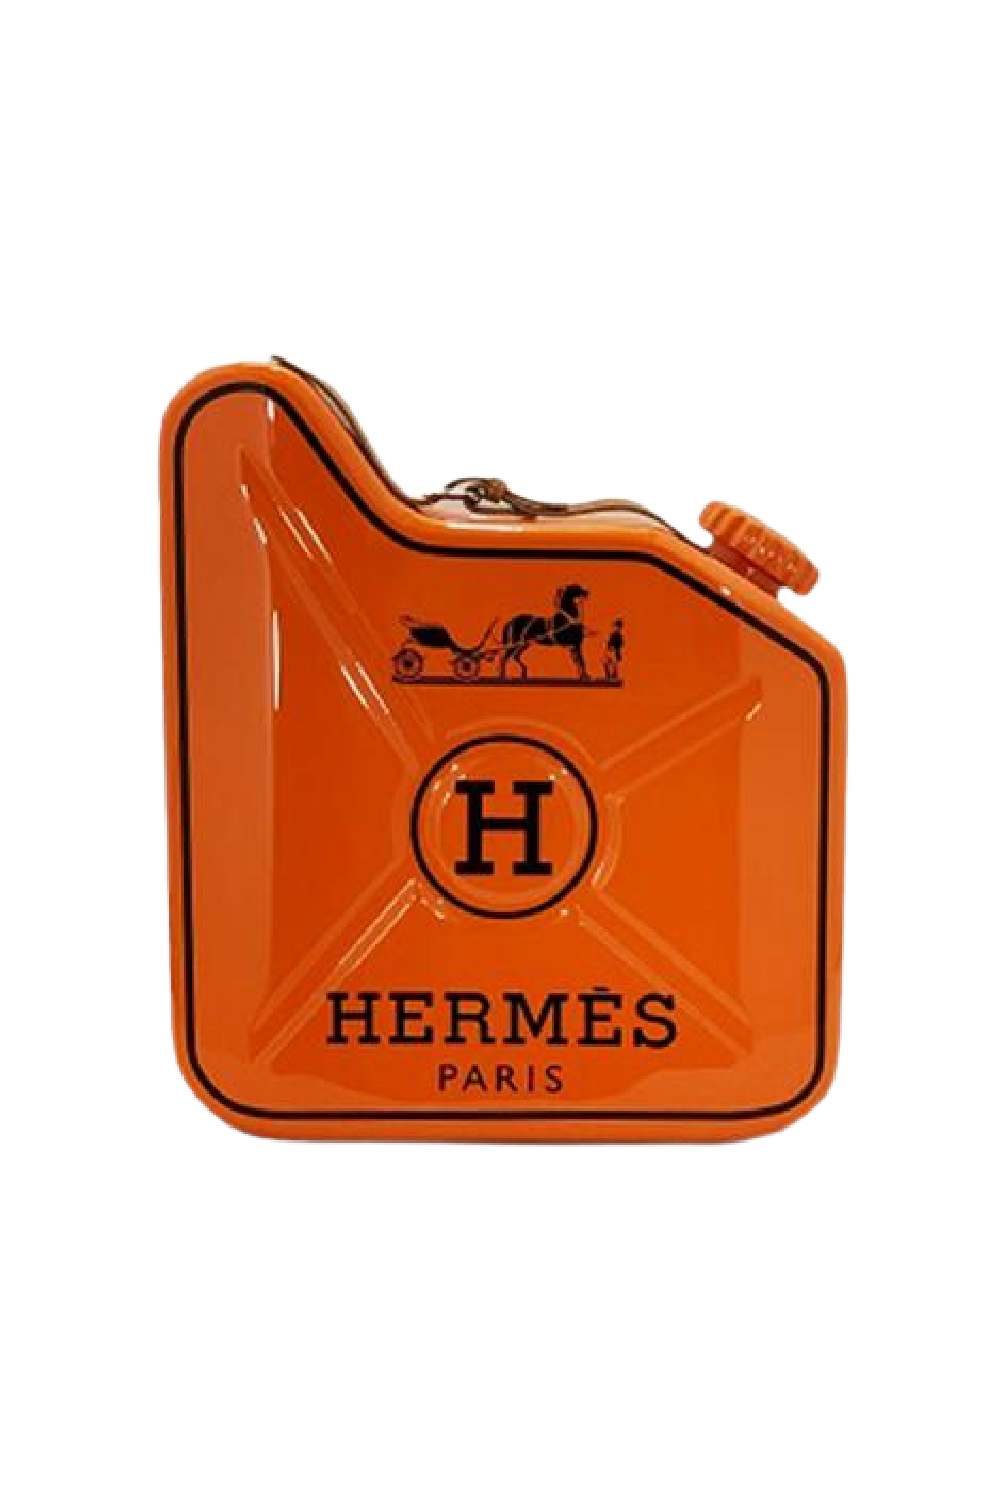 Hermes Jerrycan by James Chiew